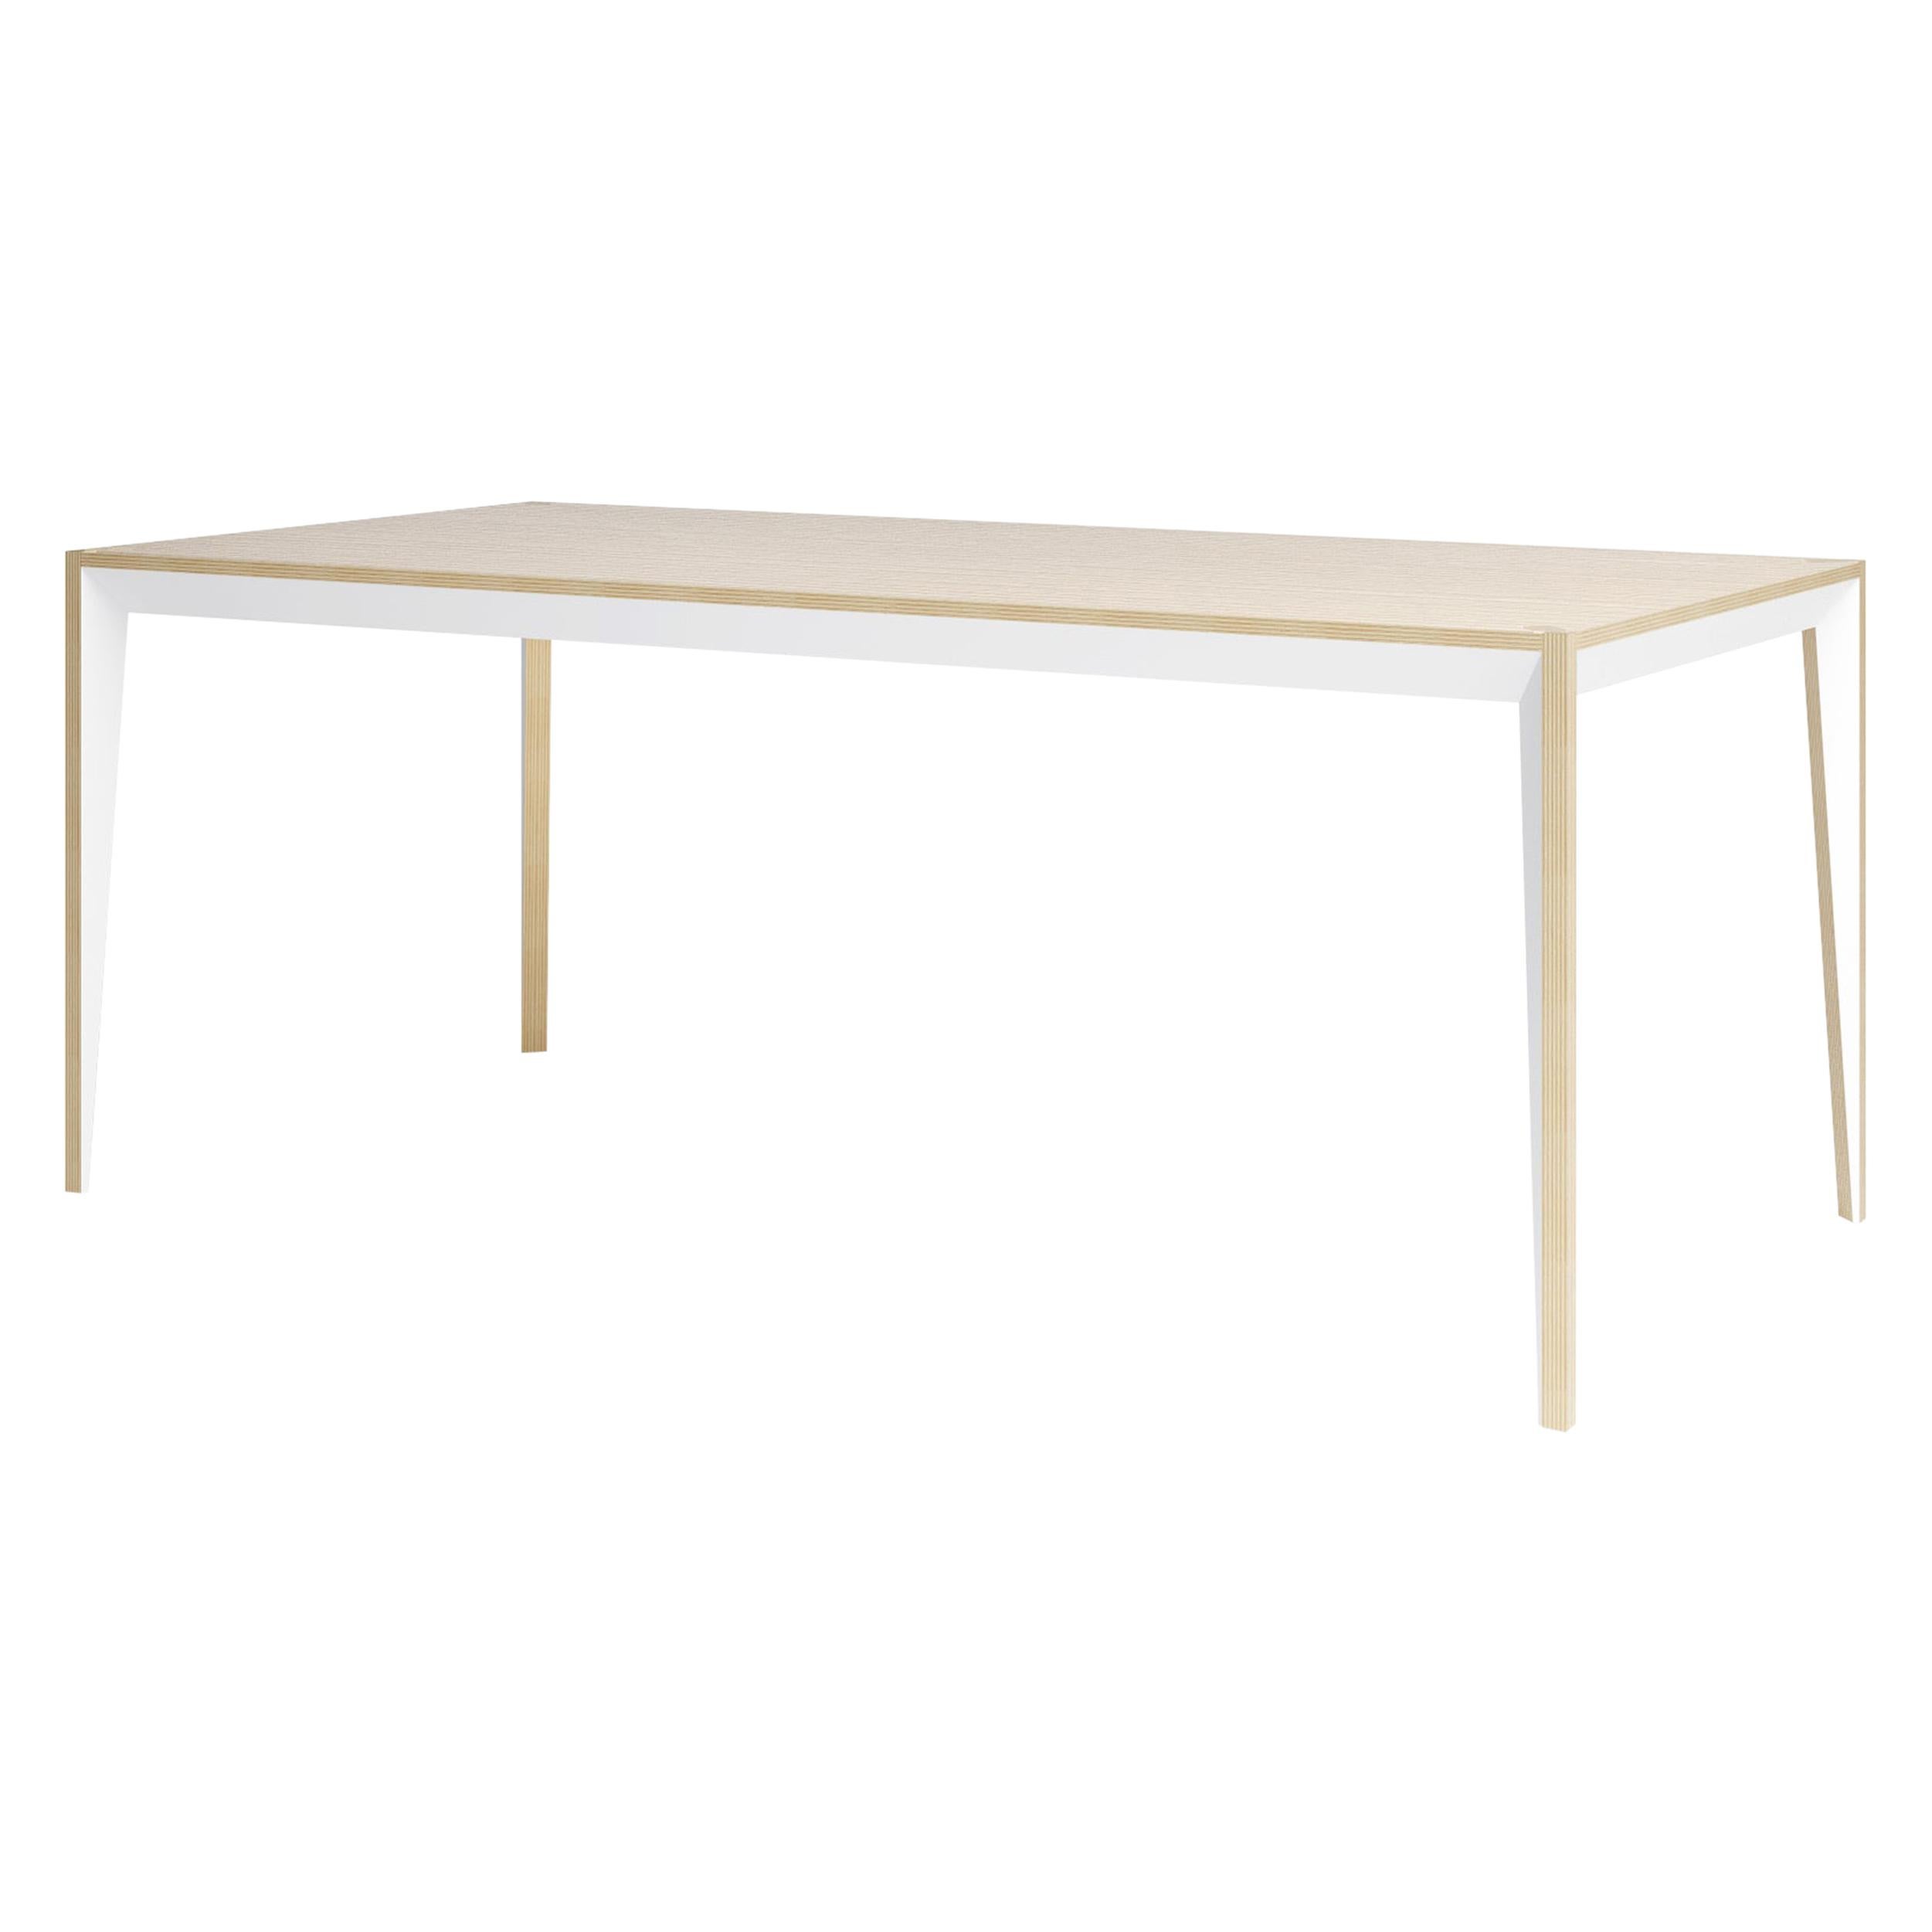 Oak White MiMi Dining Table by Miduny, Made in Italy For Sale